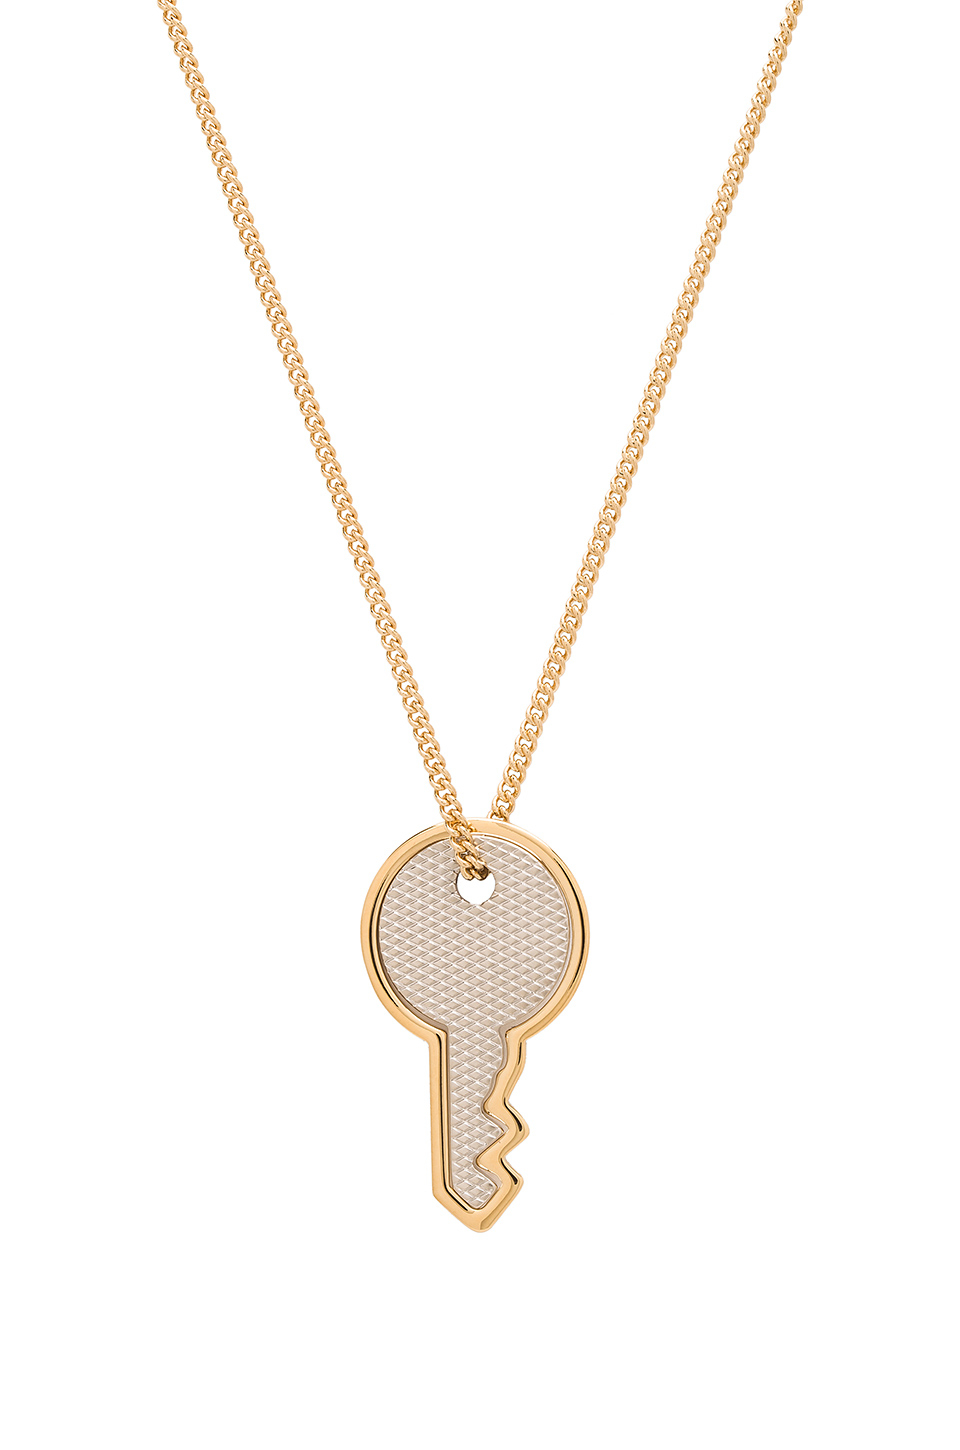 Marc by marc jacobs Lost & Found Double Key Long Pendant Necklace in ...